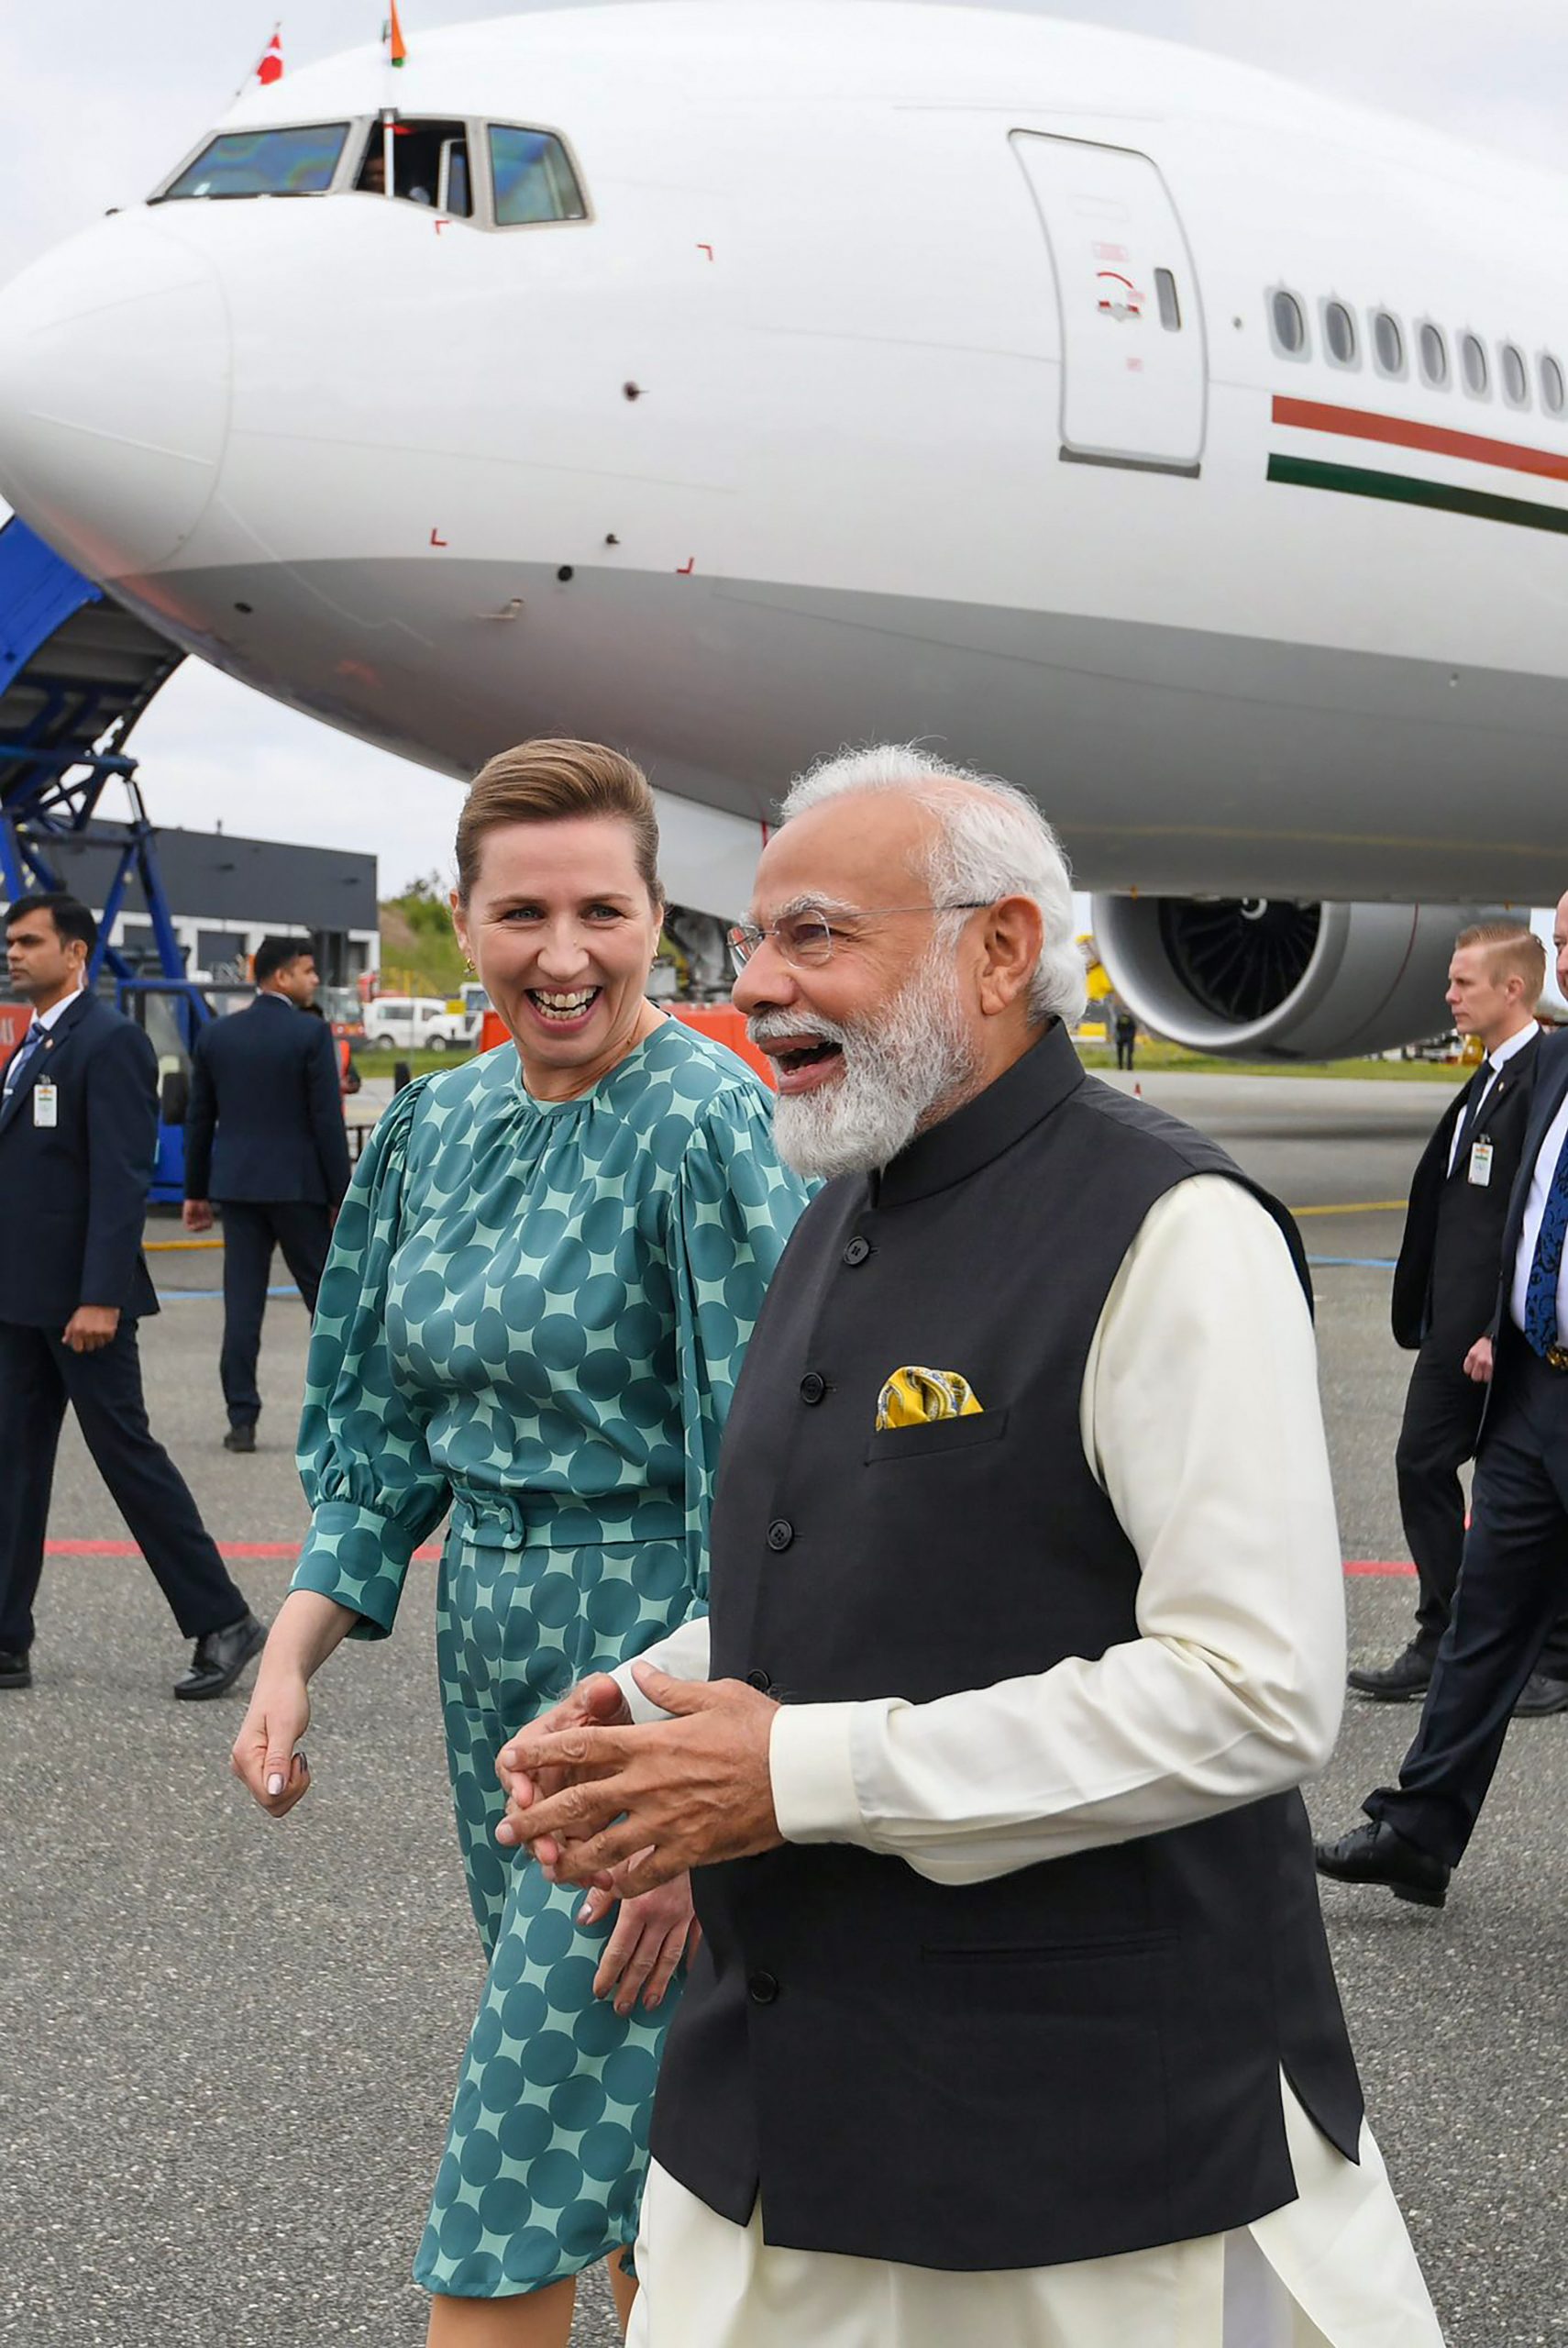 Modi goes millennial, warns Denmark of ‘FOMO’ if it doesn’t invest in India